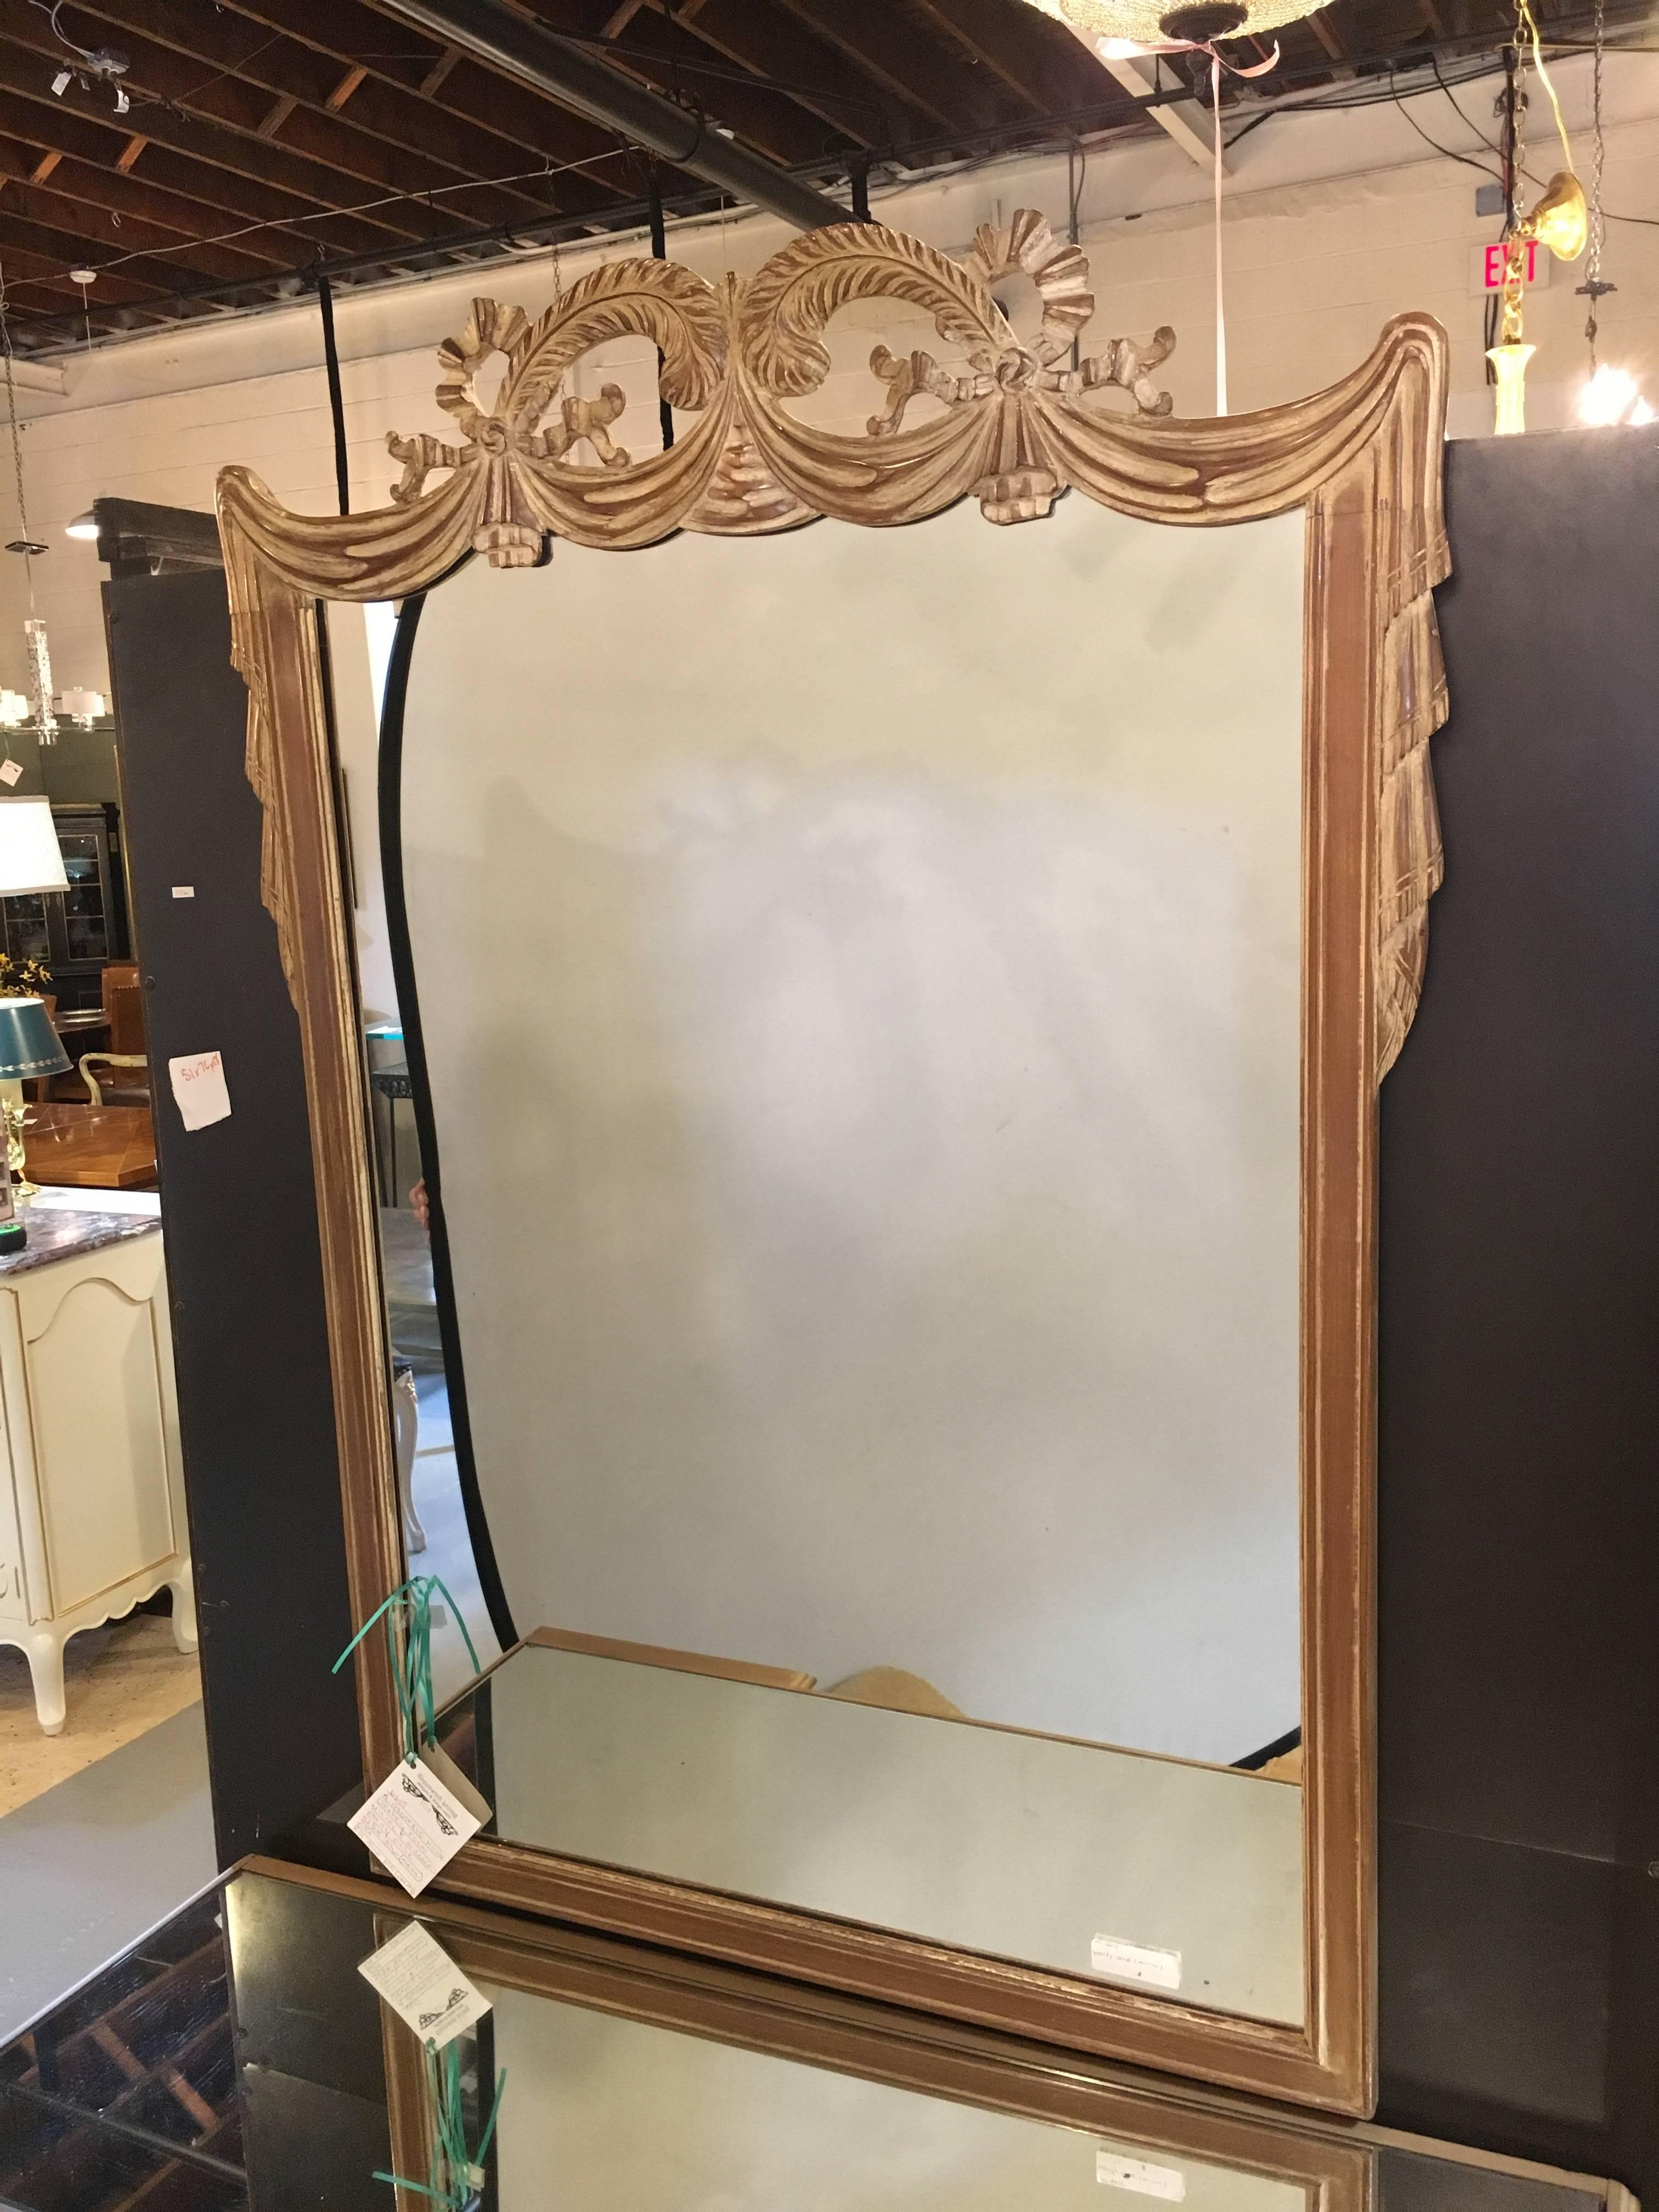 Hollywood Regency A Grosfeld House Style Drapery Form Mirror and Mirrored Vanity Desk